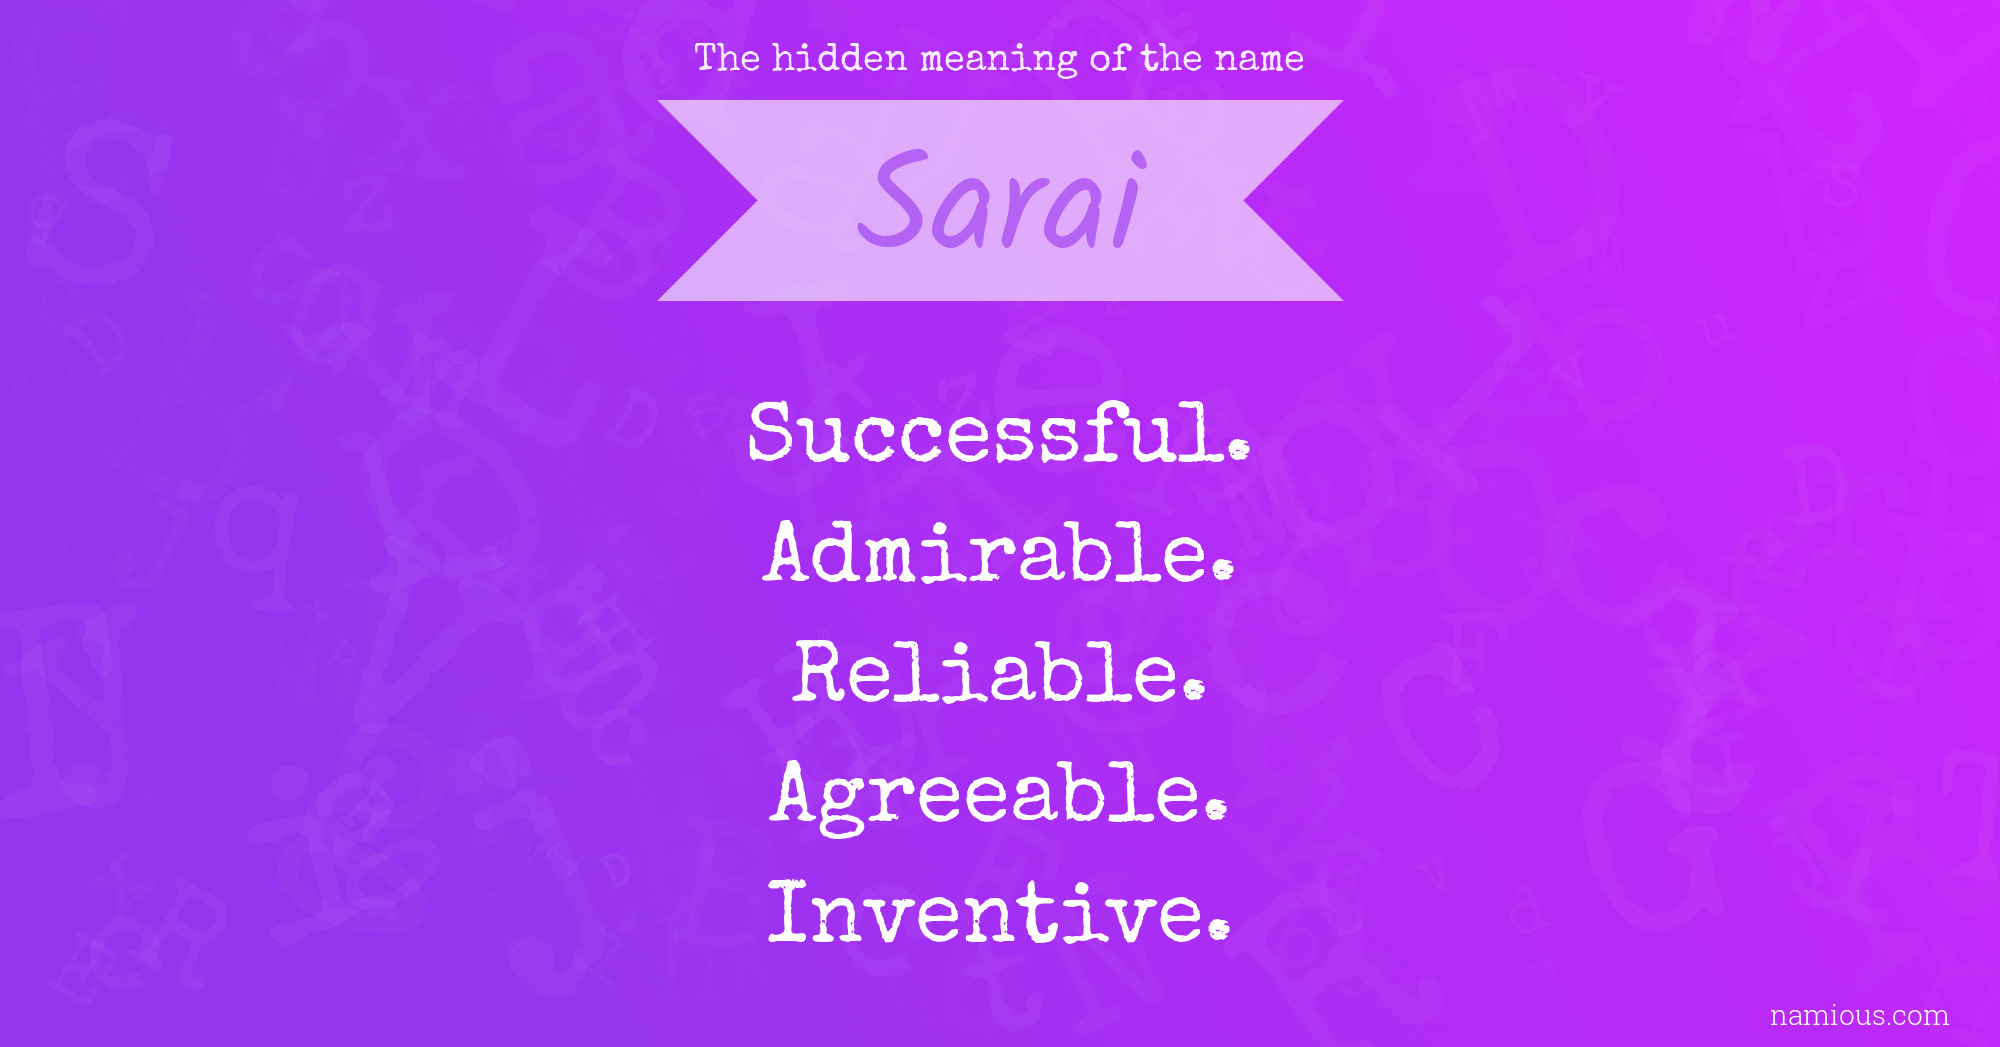 The hidden meaning of the name Sarai